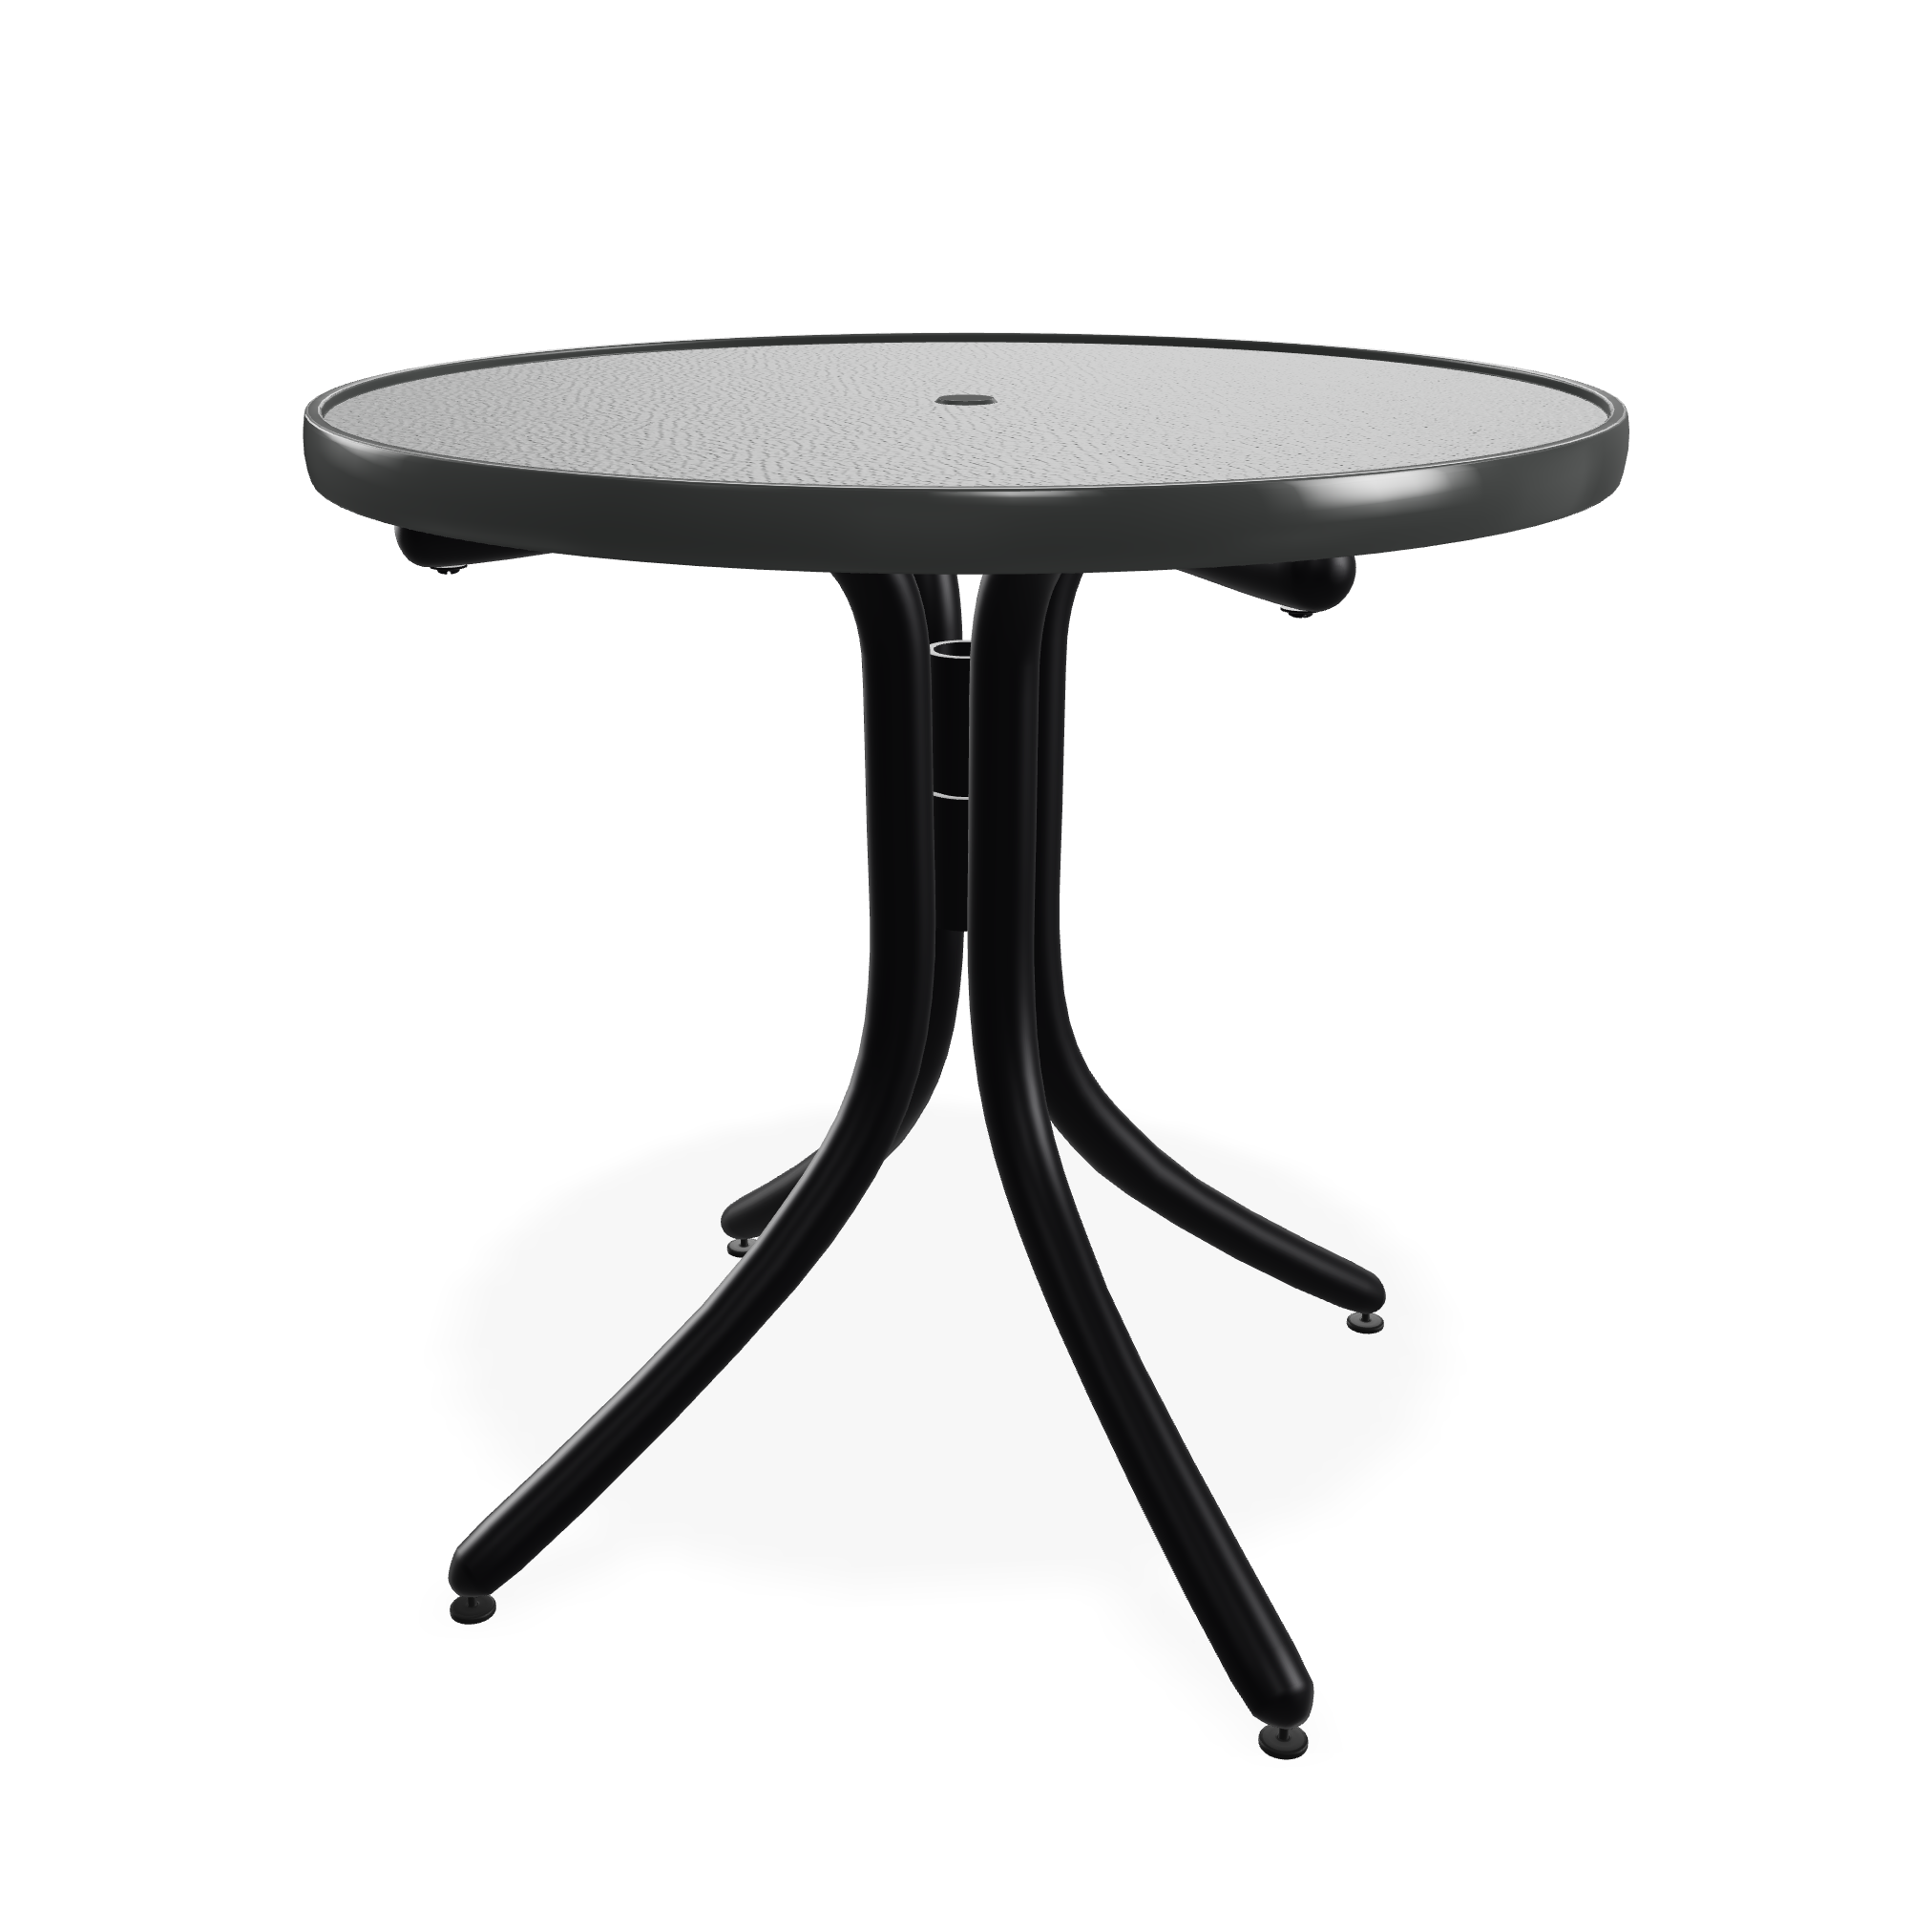 30" Round Value Hammered MGP Top Tables By Telescope